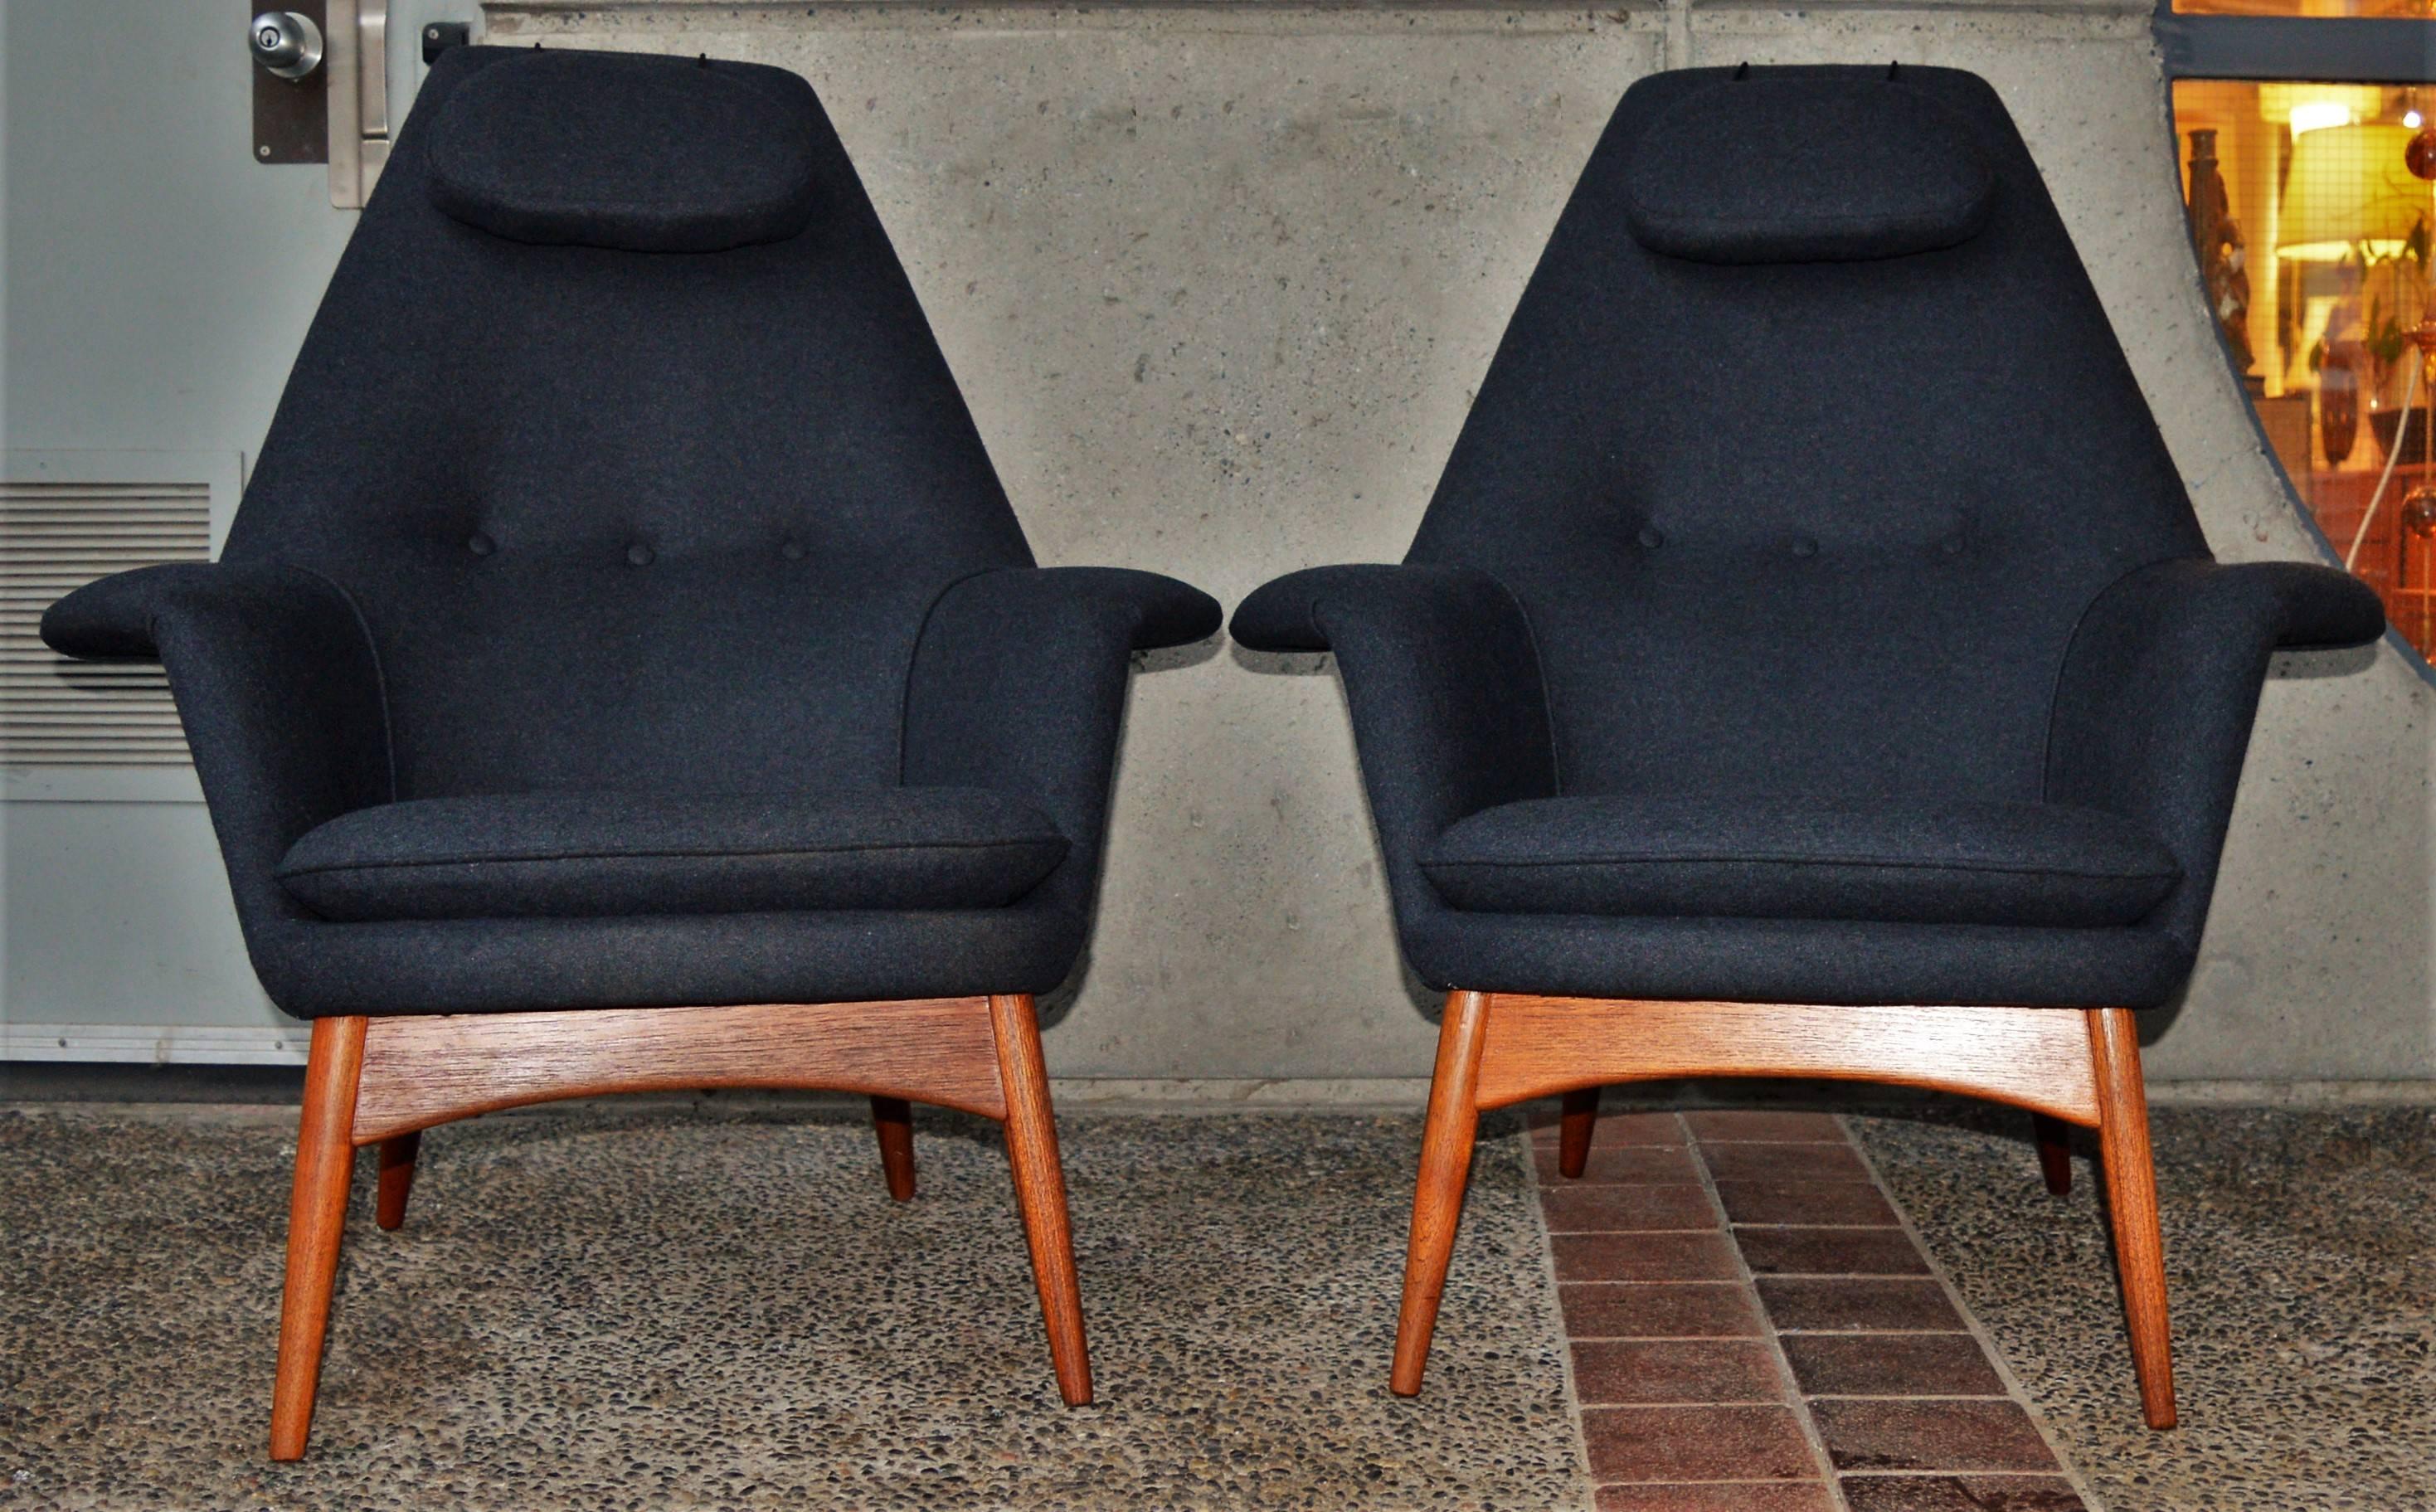 This is a totally killer pair of restored Danish modern teak lounge chairs - called the Manta Ray Chair - by Bjorn Engo for DUX (Sweden) designed in the 1960s. The gorgeous sculptural teak frame is beautifully extends to round ends that support the